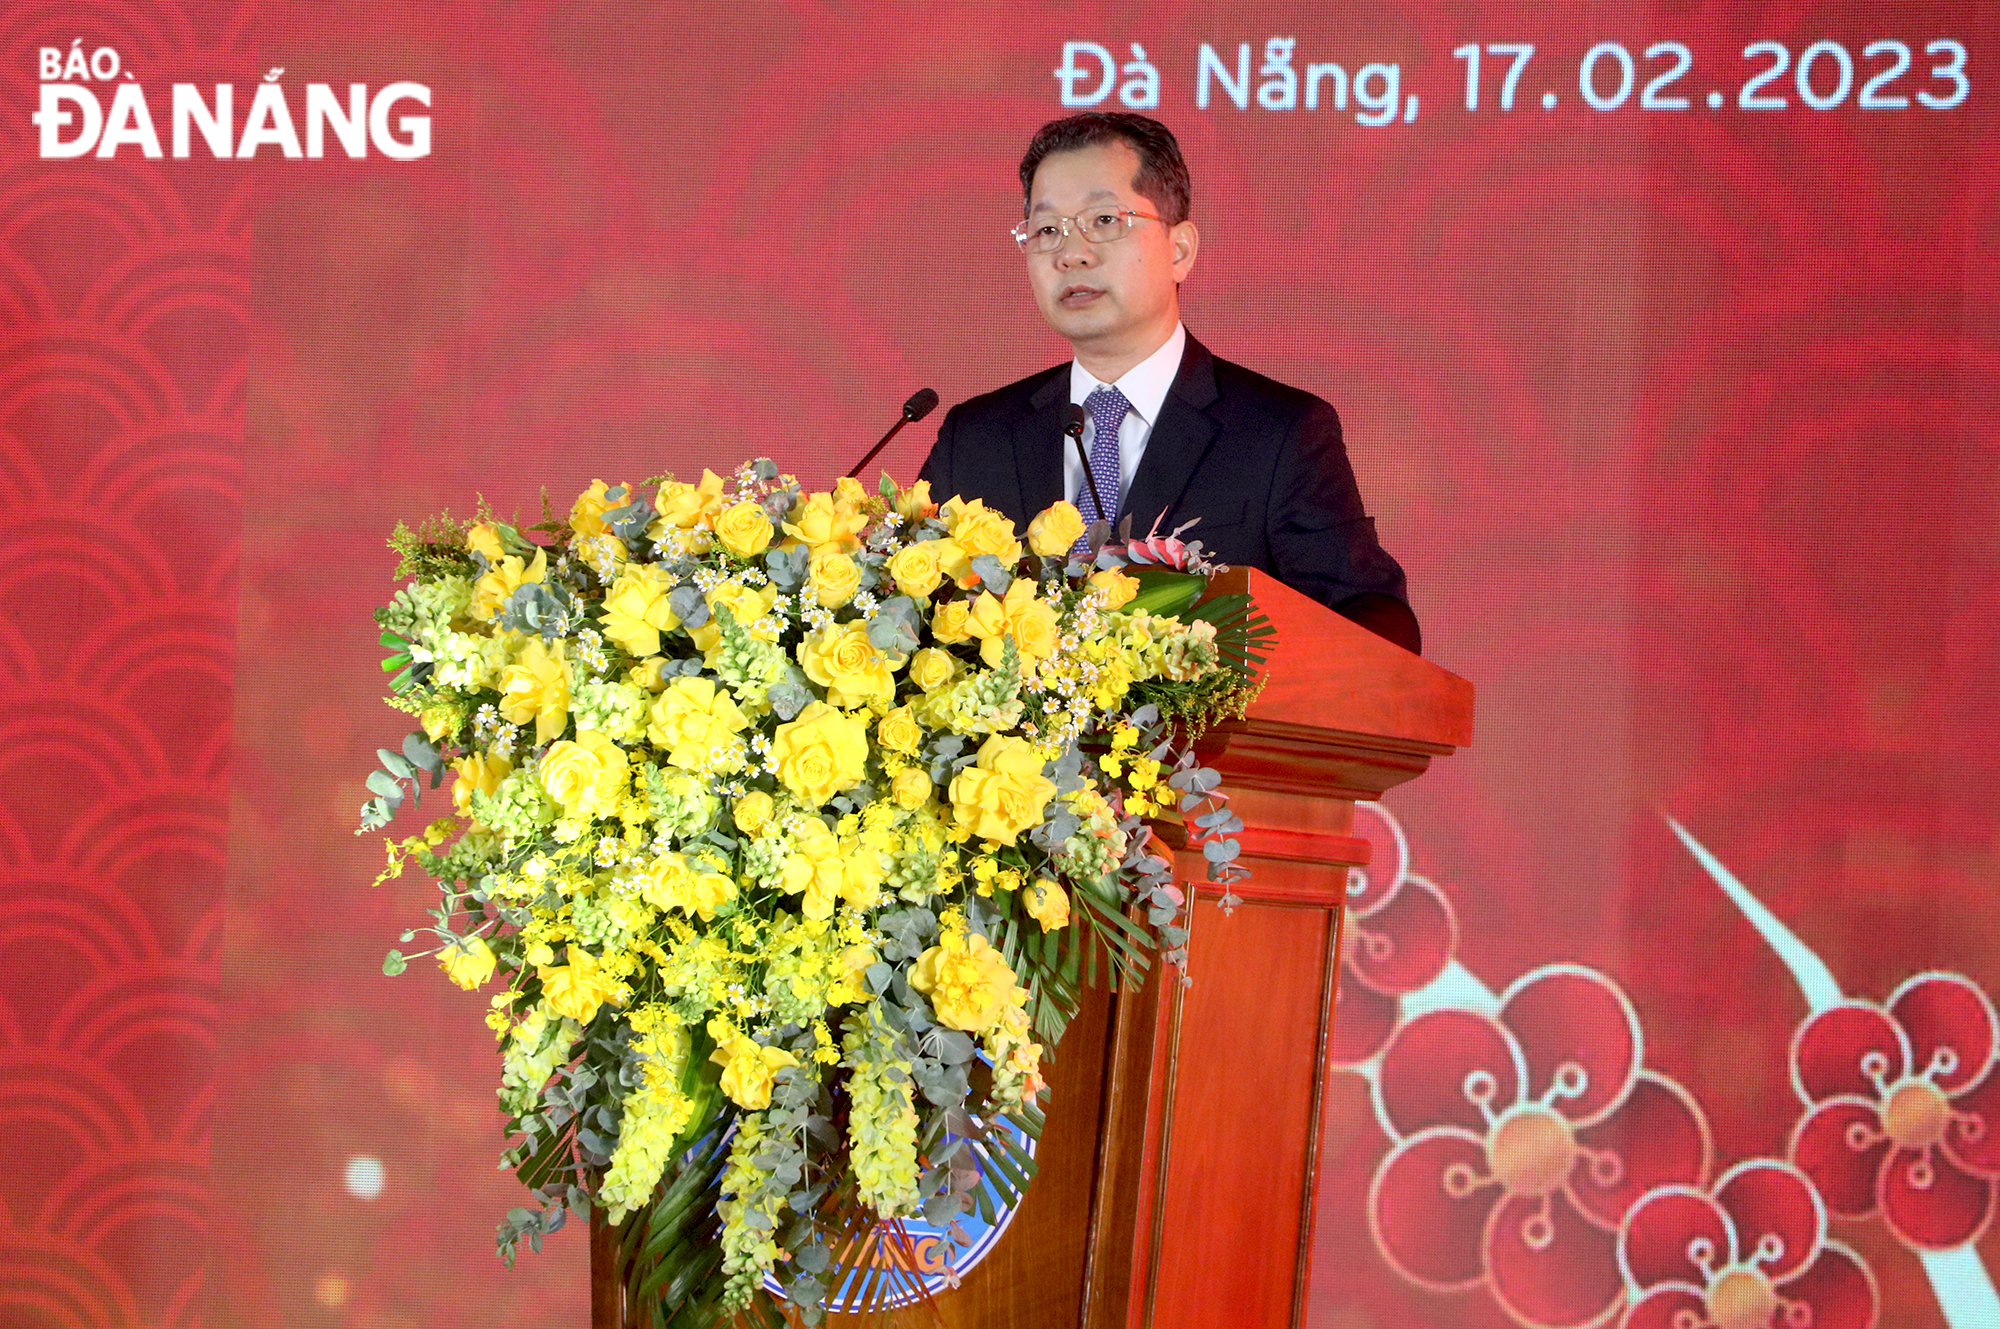 Da Nang Party Committee Secretary Nguyen Van Quang speaking at the get-together